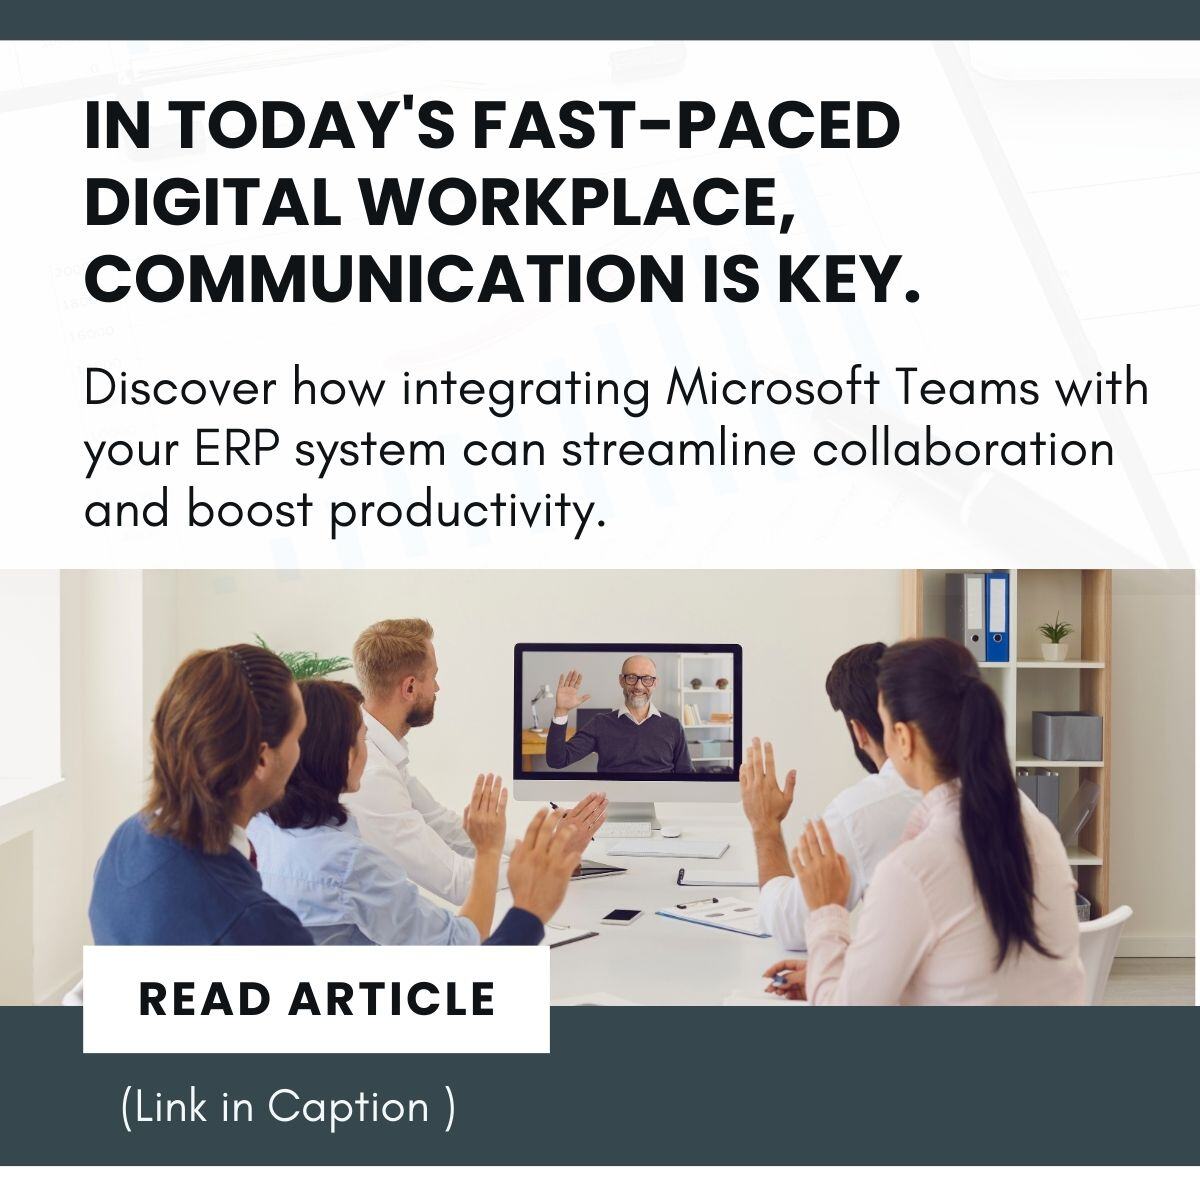 Read the blog and know more hubs.li/Q02wDBWk0
#MicrosoftTeams #ERPIntegration #DigitalWorkplace #ERP #ERPSolutions